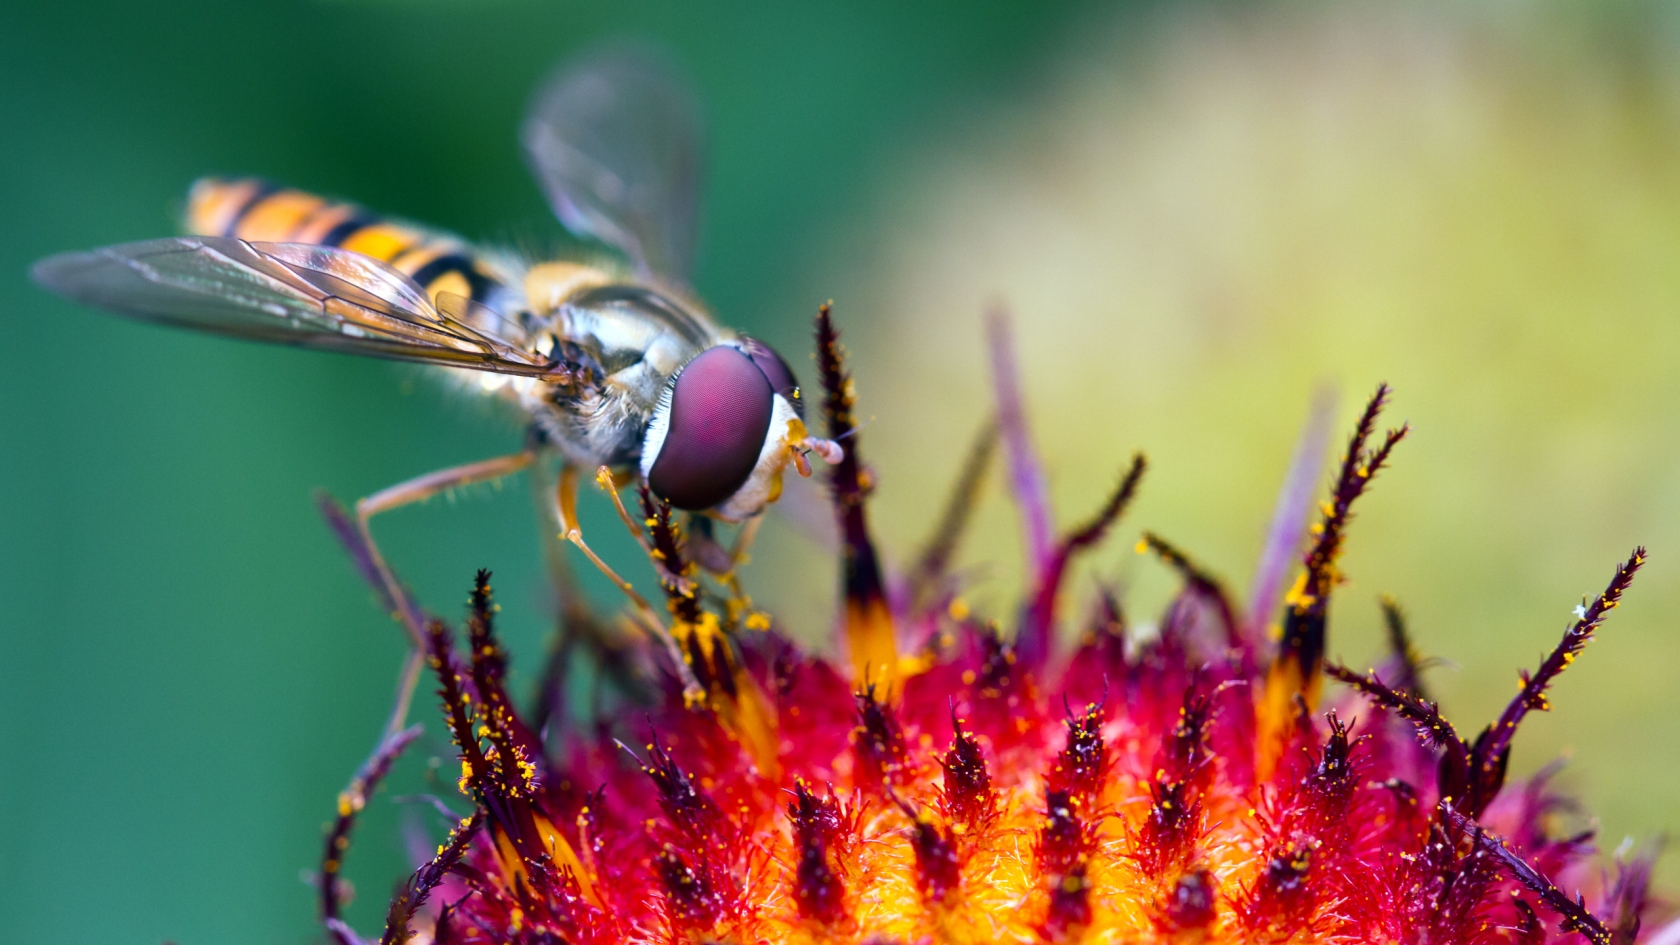 Hover Fly at Work for 1680 x 945 HDTV resolution